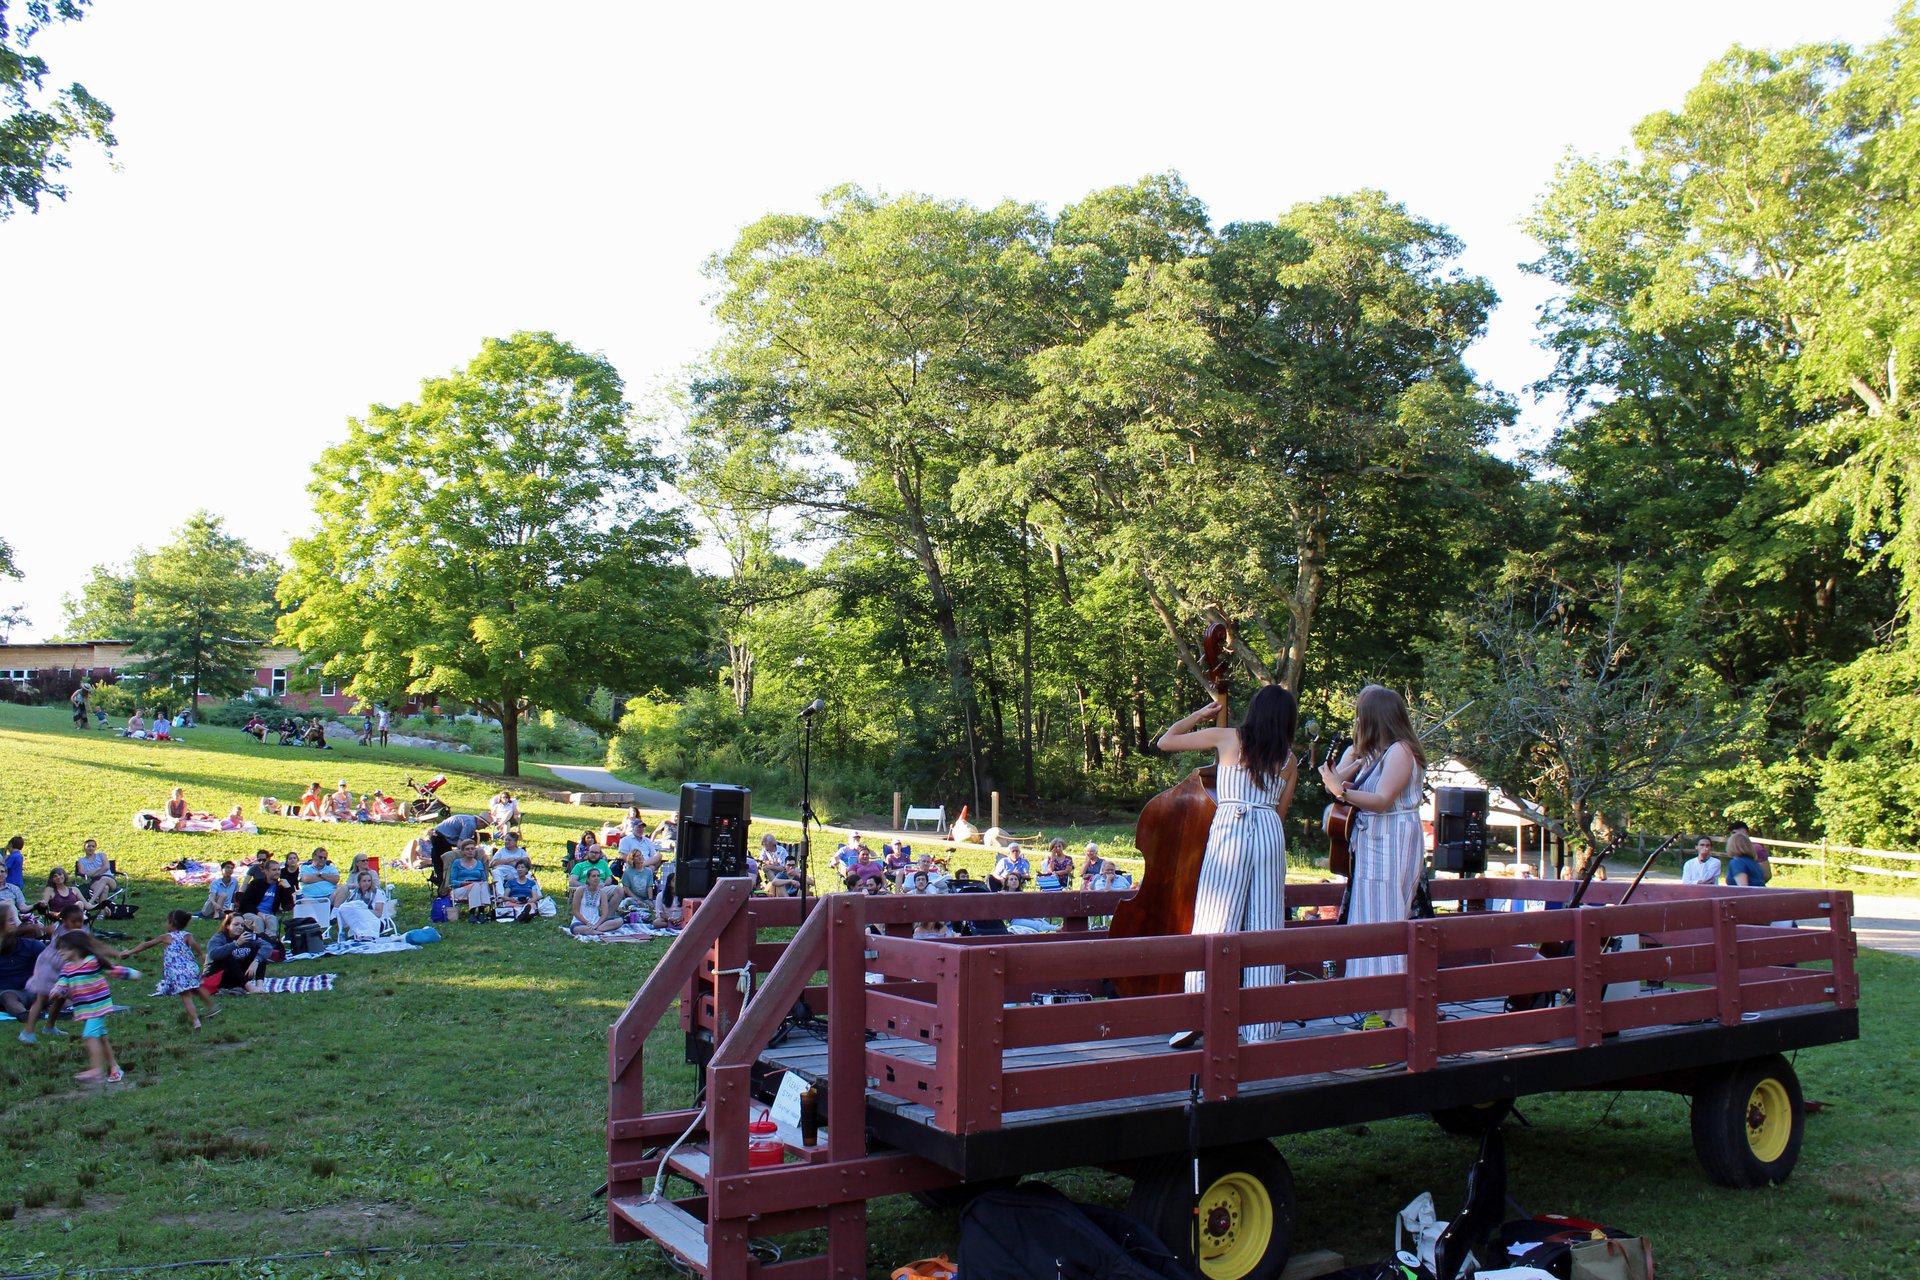 A drummer, guitarist, and singer on a wagon playing in front of people on lawn chairs and blankets on a hillside.